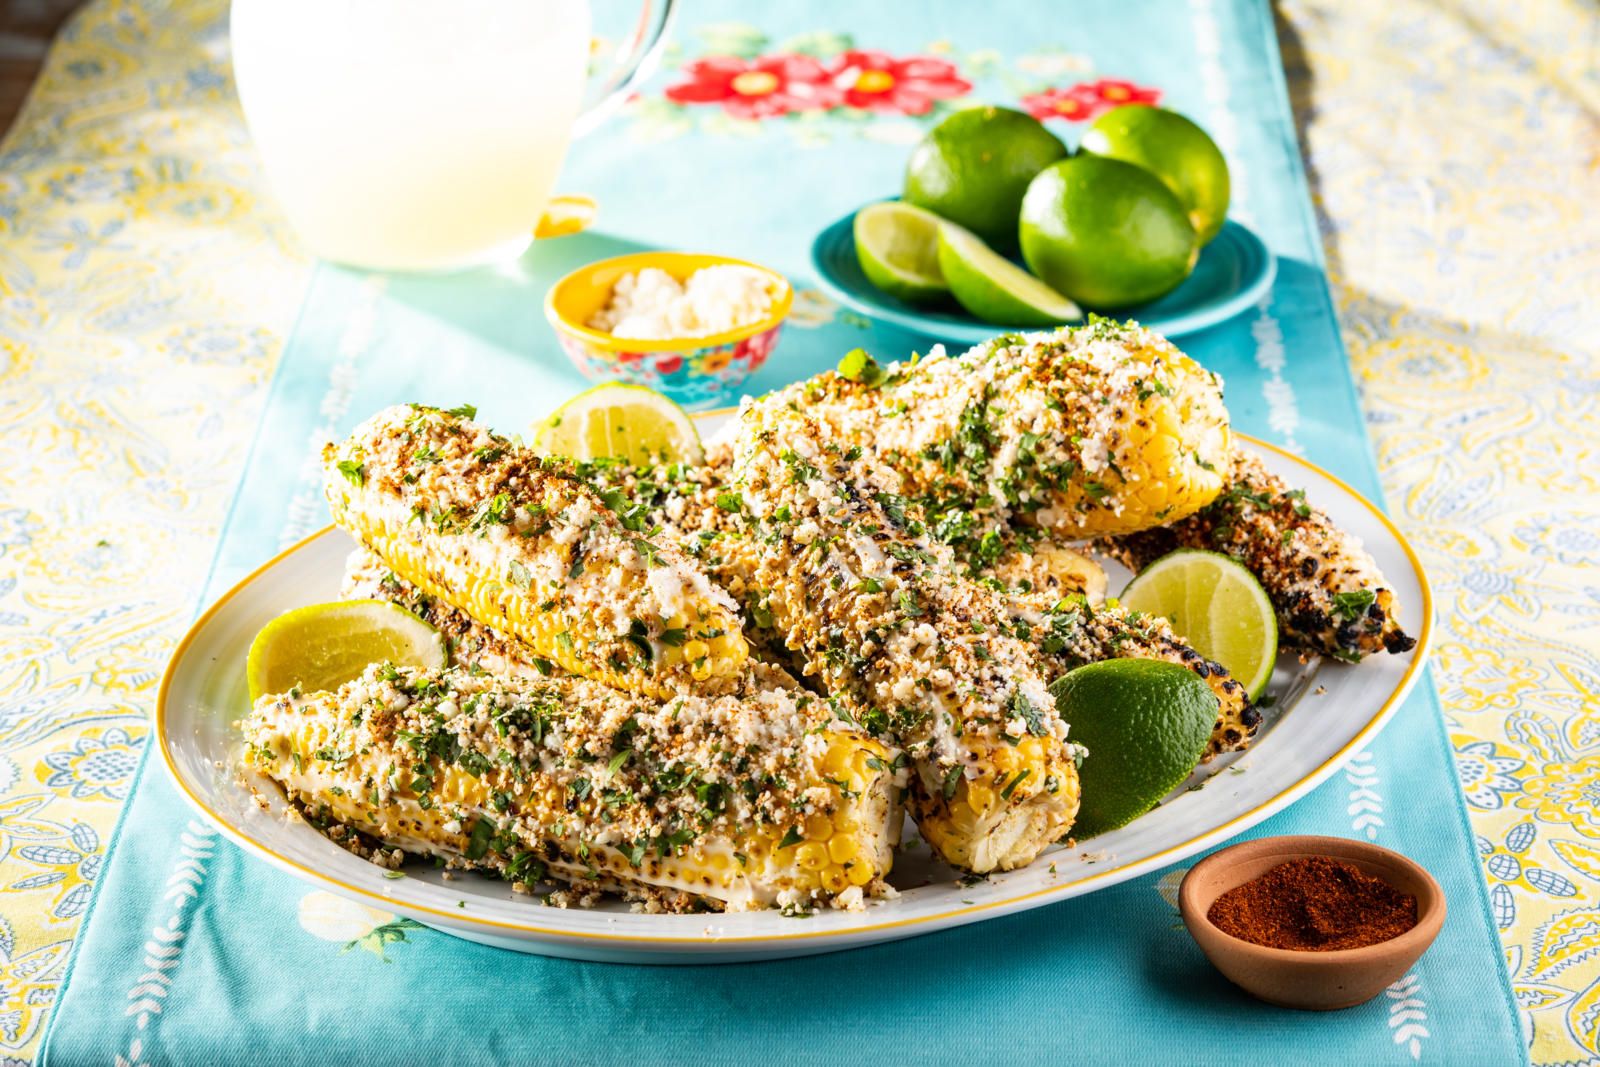 Easy Elote Corn Recipe - How to Make Mexican Street Corn